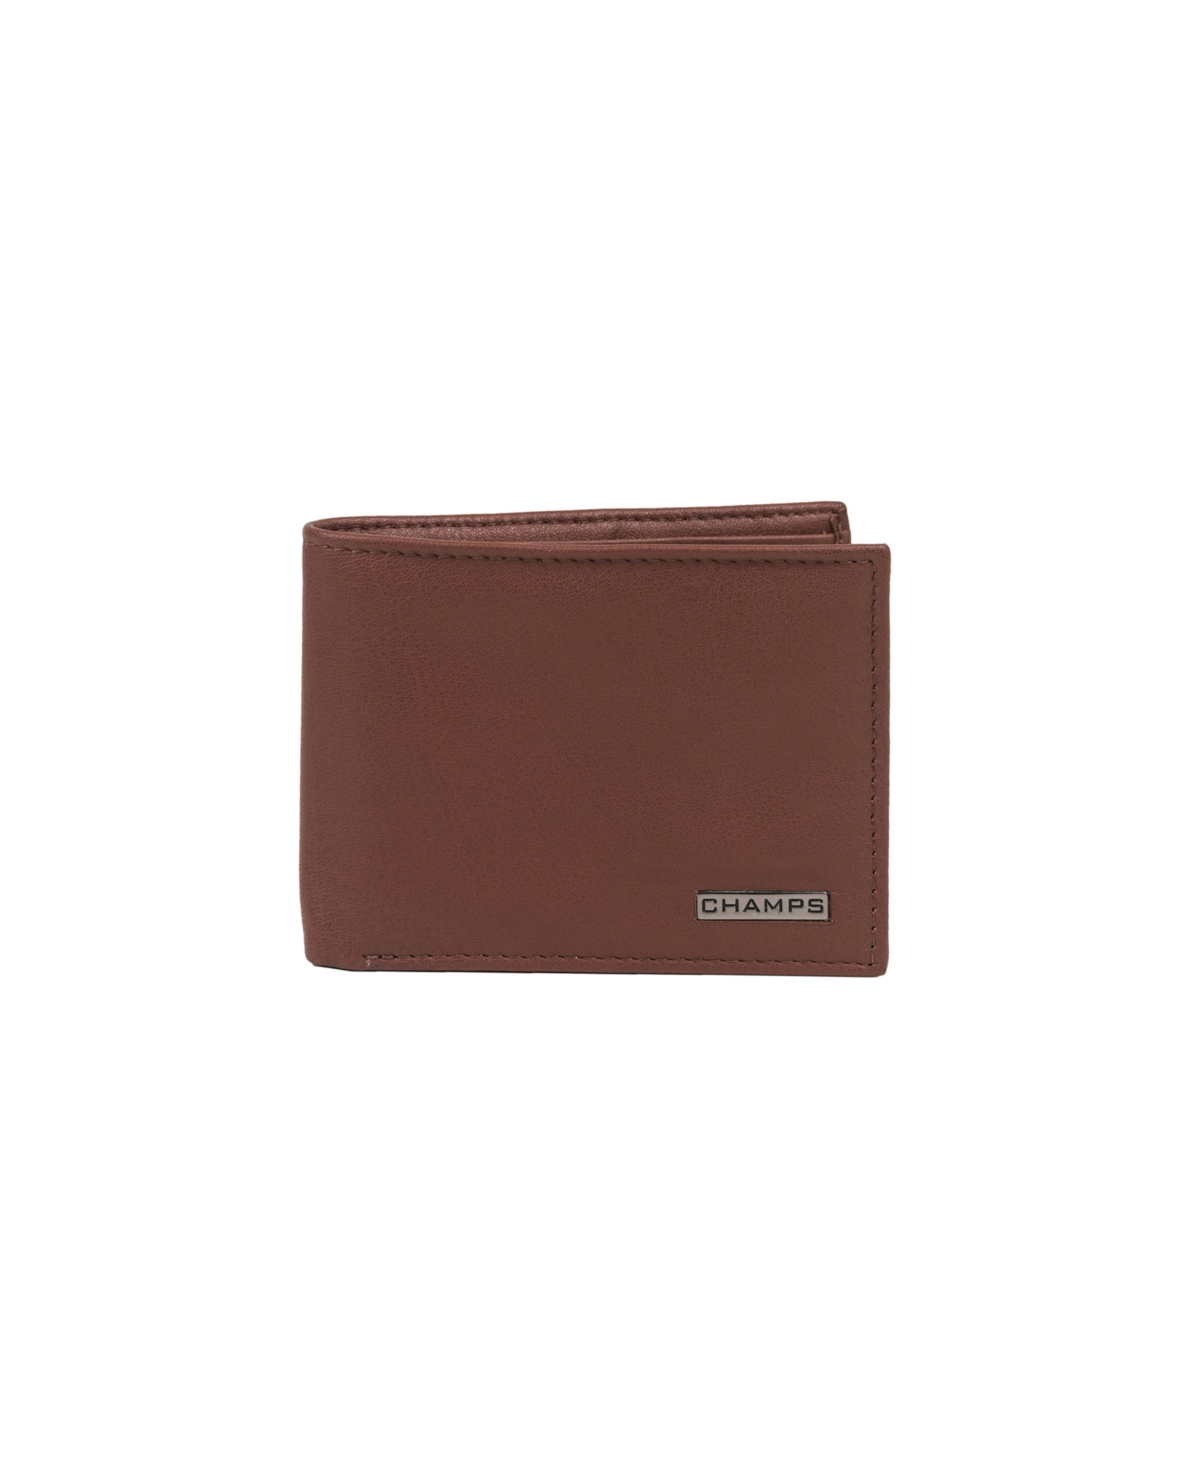 Champs Men's Champs Leather Rfid Bi-Fold Wallet in Gift Box